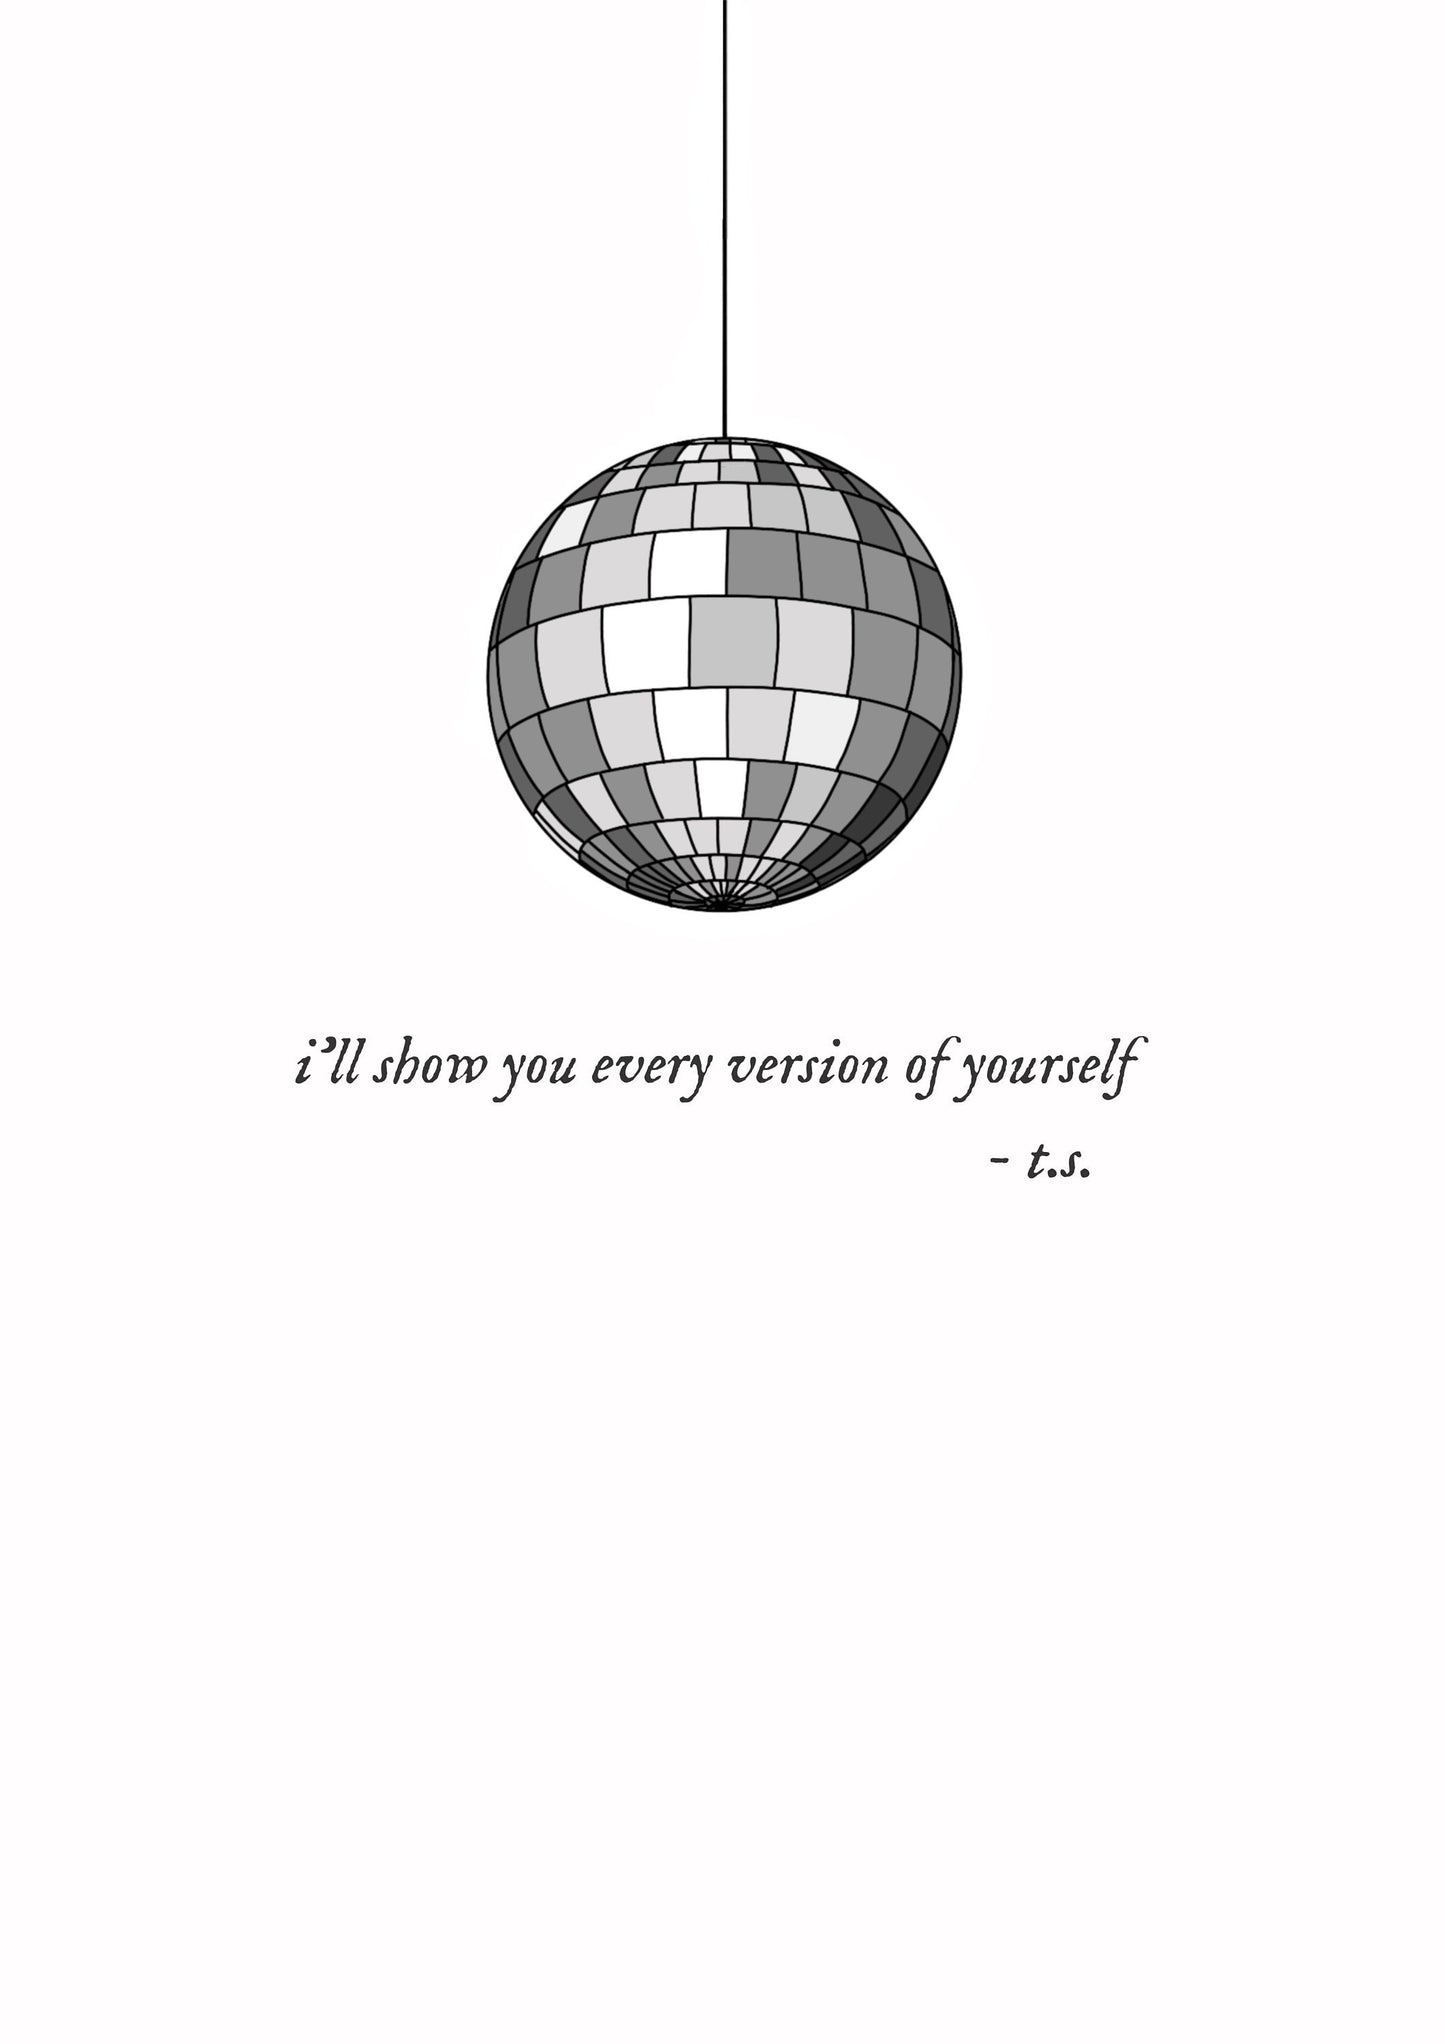 Mirrorball Print | Taylor Swift Print | I'll Show You Every Version of Yourself